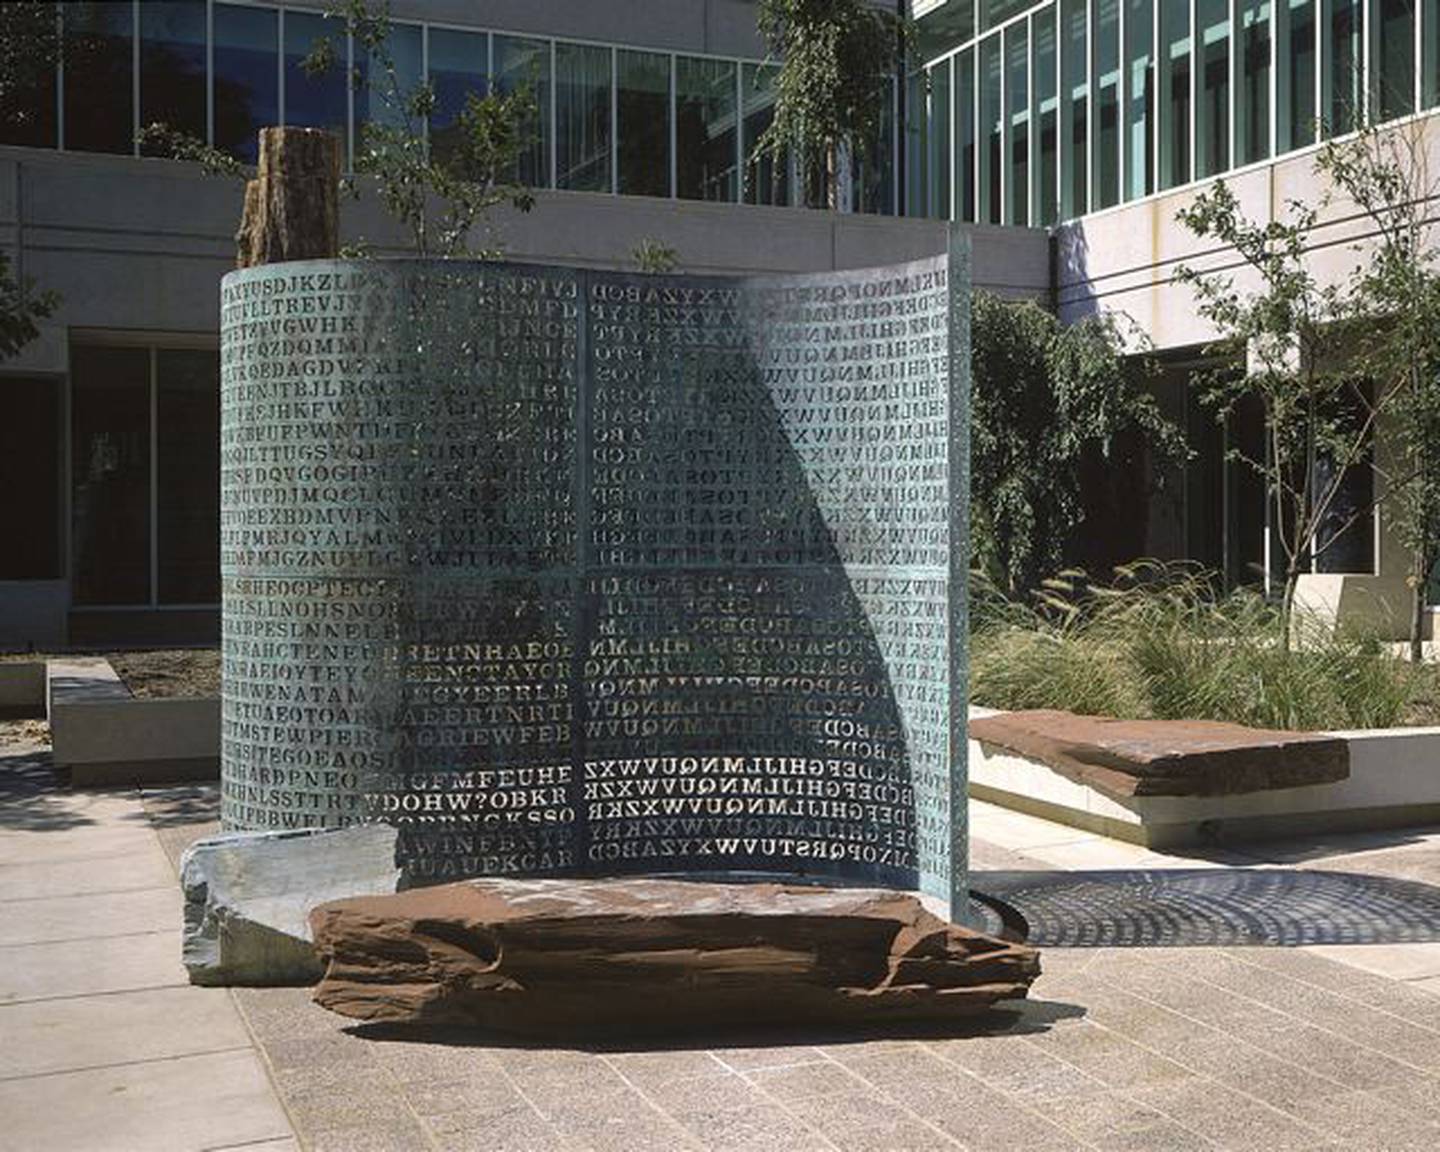 Three out of the four 'Kryptos' sculptures created by James Sanborn and installed at the CIA headquarters in Virginia, US, have been solved. The contents of the fourth remains a mystery. Photo: Jim Sanborn 